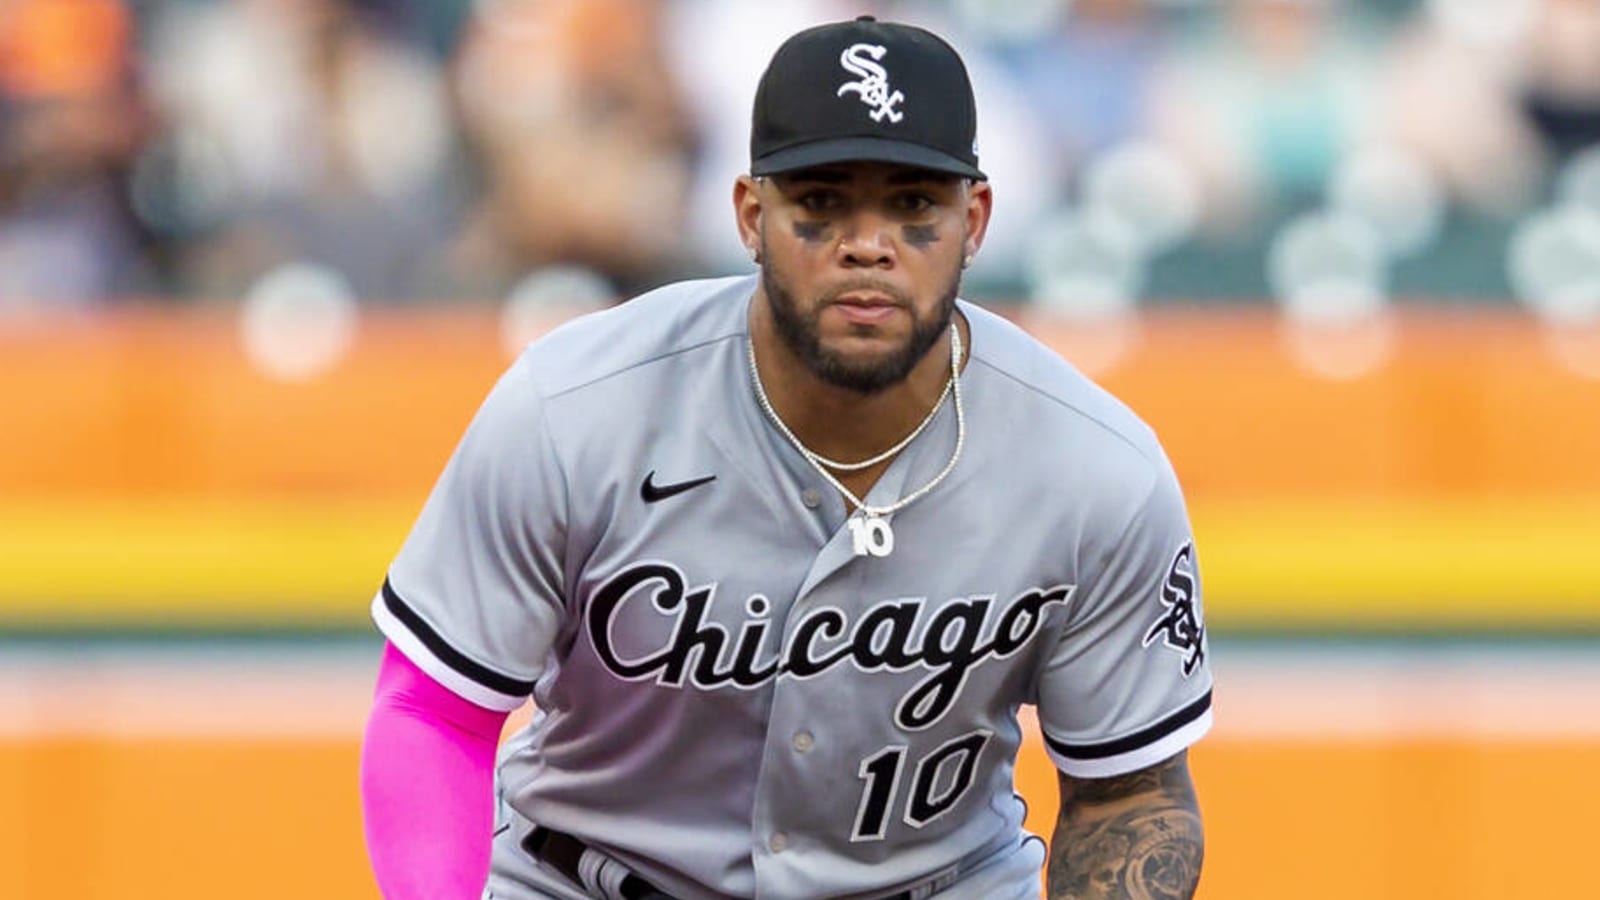 White Sox's Yoan Moncada to be activated from IL on Tuesday | Yardbarker